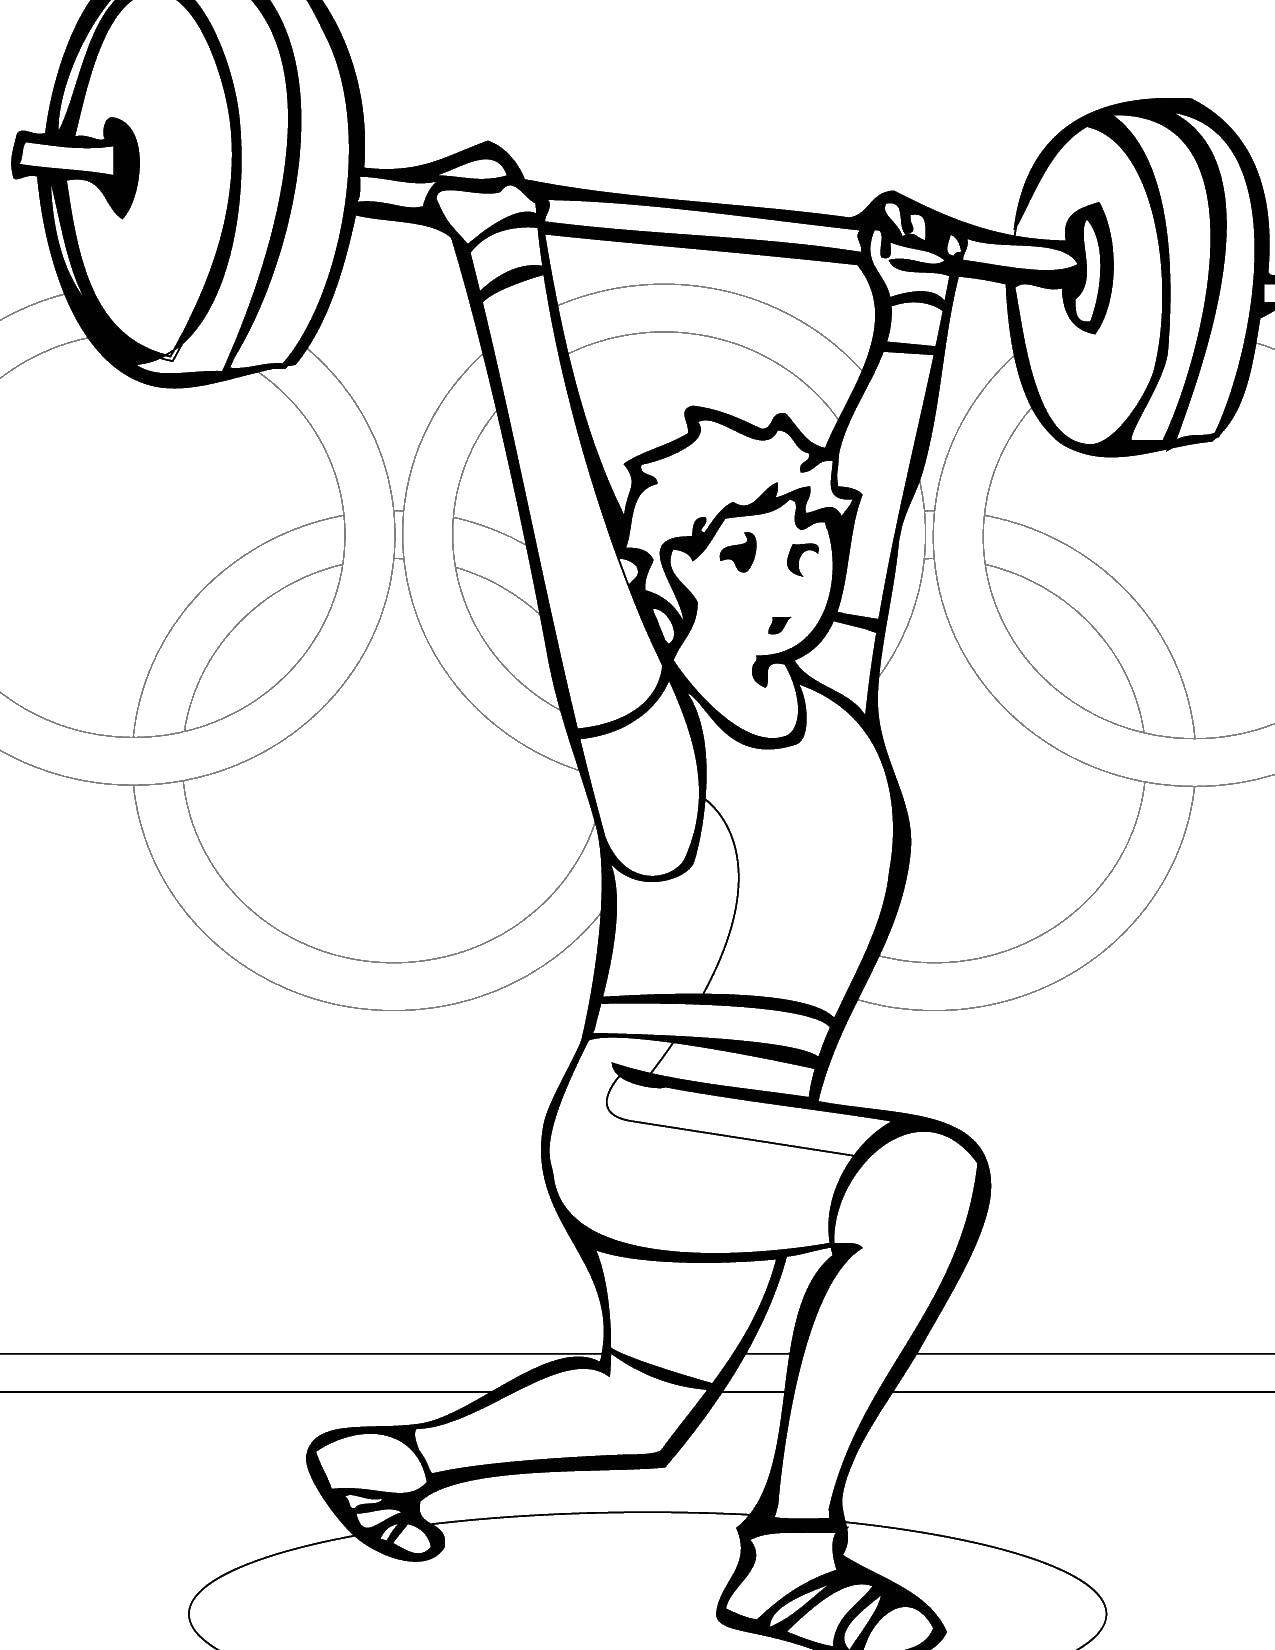 Coloring Weightlifting. Category Sports. Tags:  sports, weightlifting.